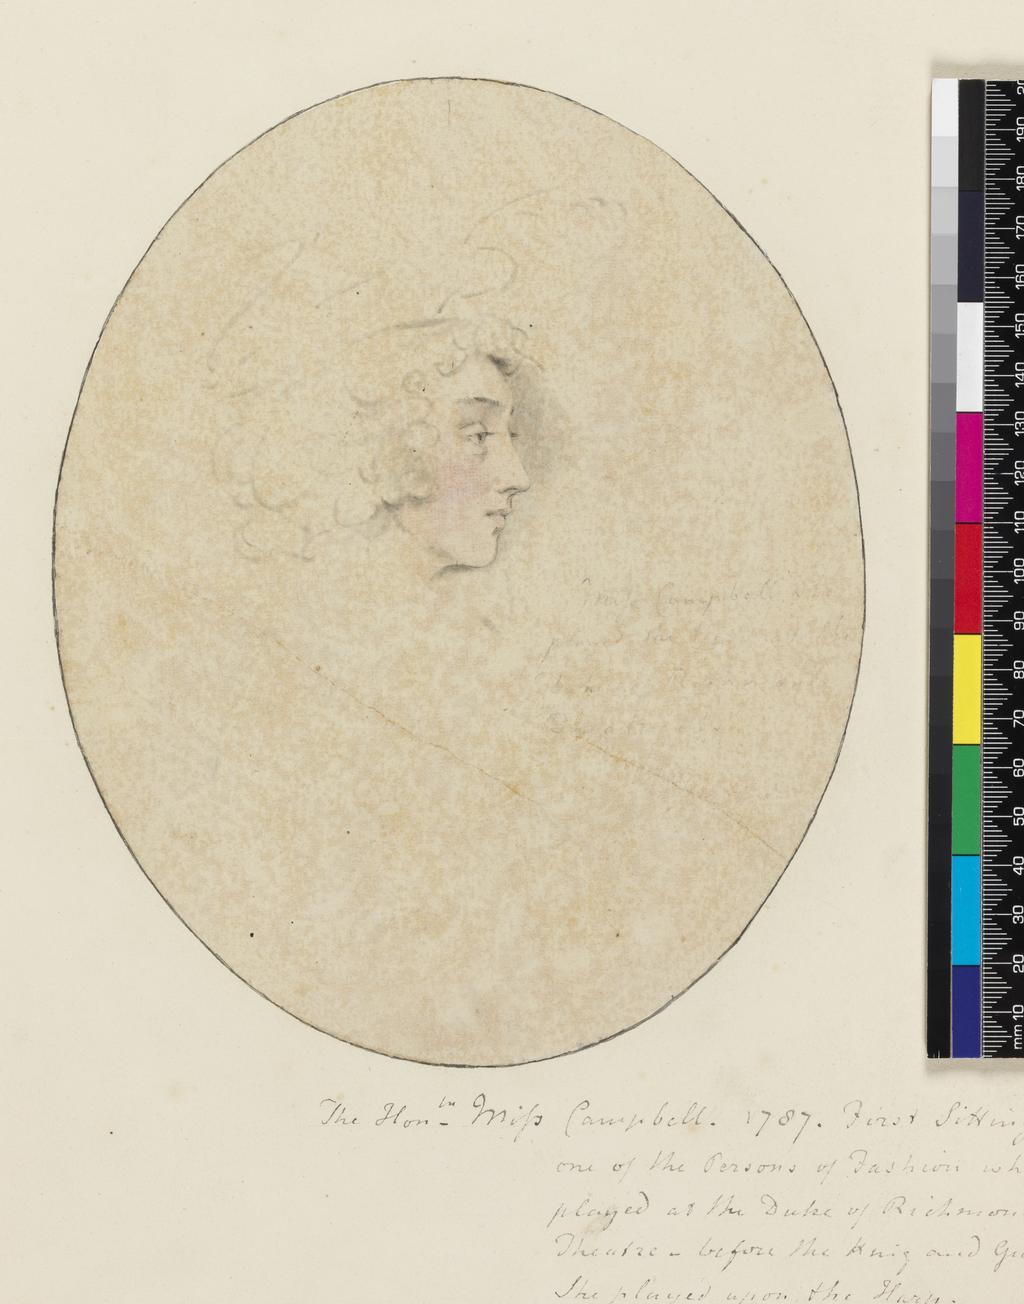 An image of Miss Campbell. Downman, John (British, 1750-1824). Laid down on recto of album sheet, surrounded by drawn ink line. Black and red chalk, with stump on paper, laid down (chalk or watercolour applied to verso), height 202 mm, width 165 mm, 1787.